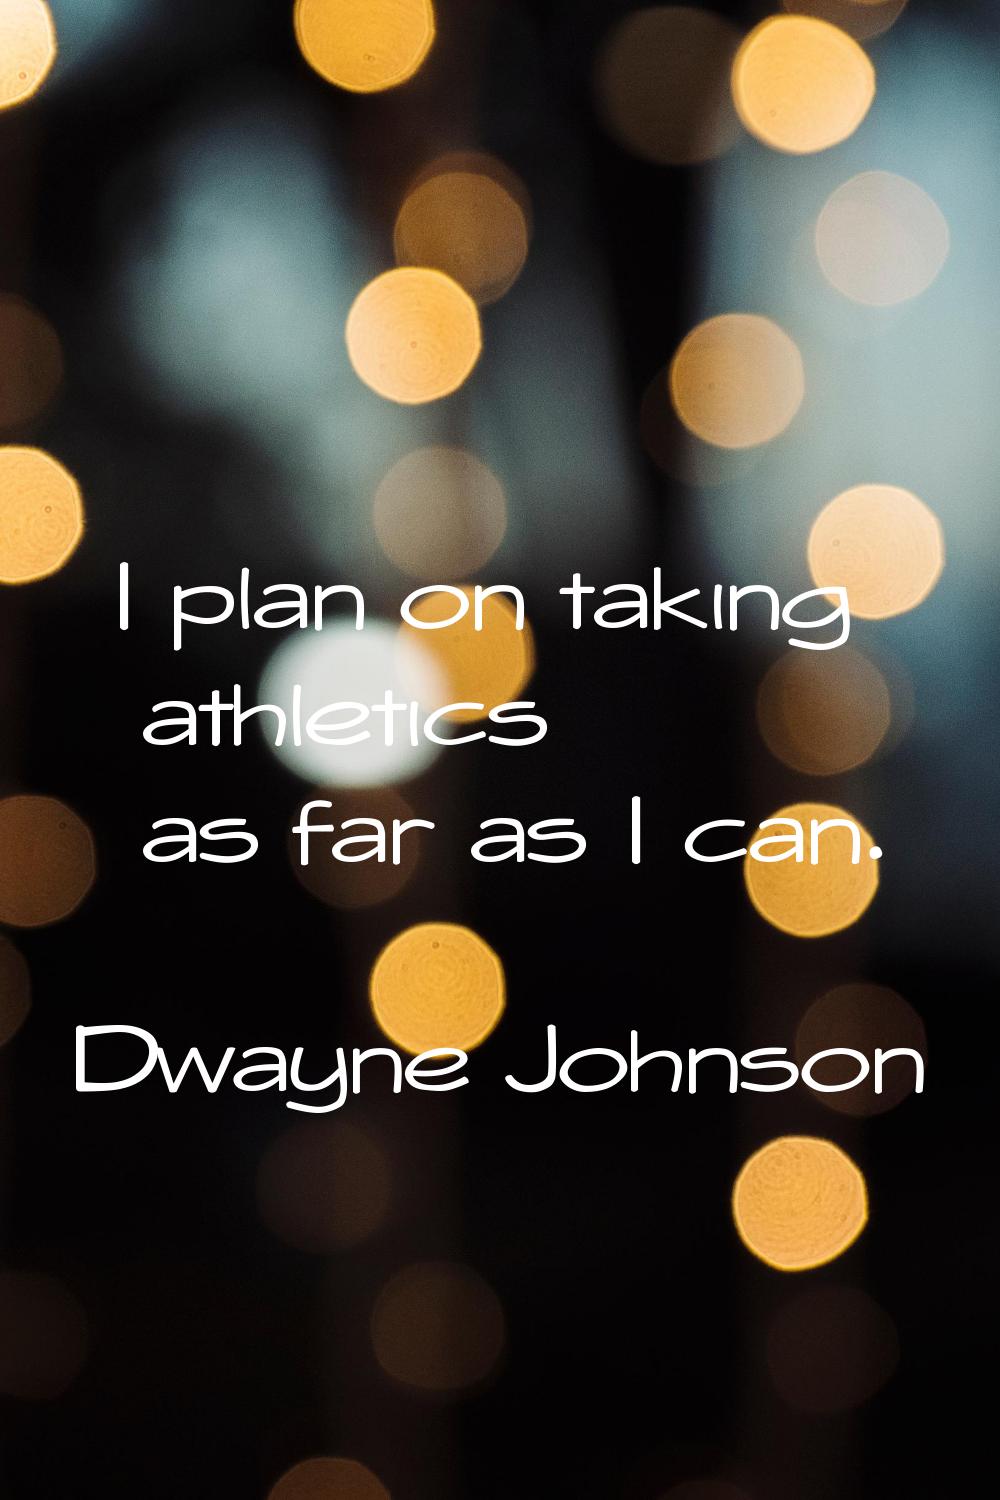 I plan on taking athletics as far as I can.